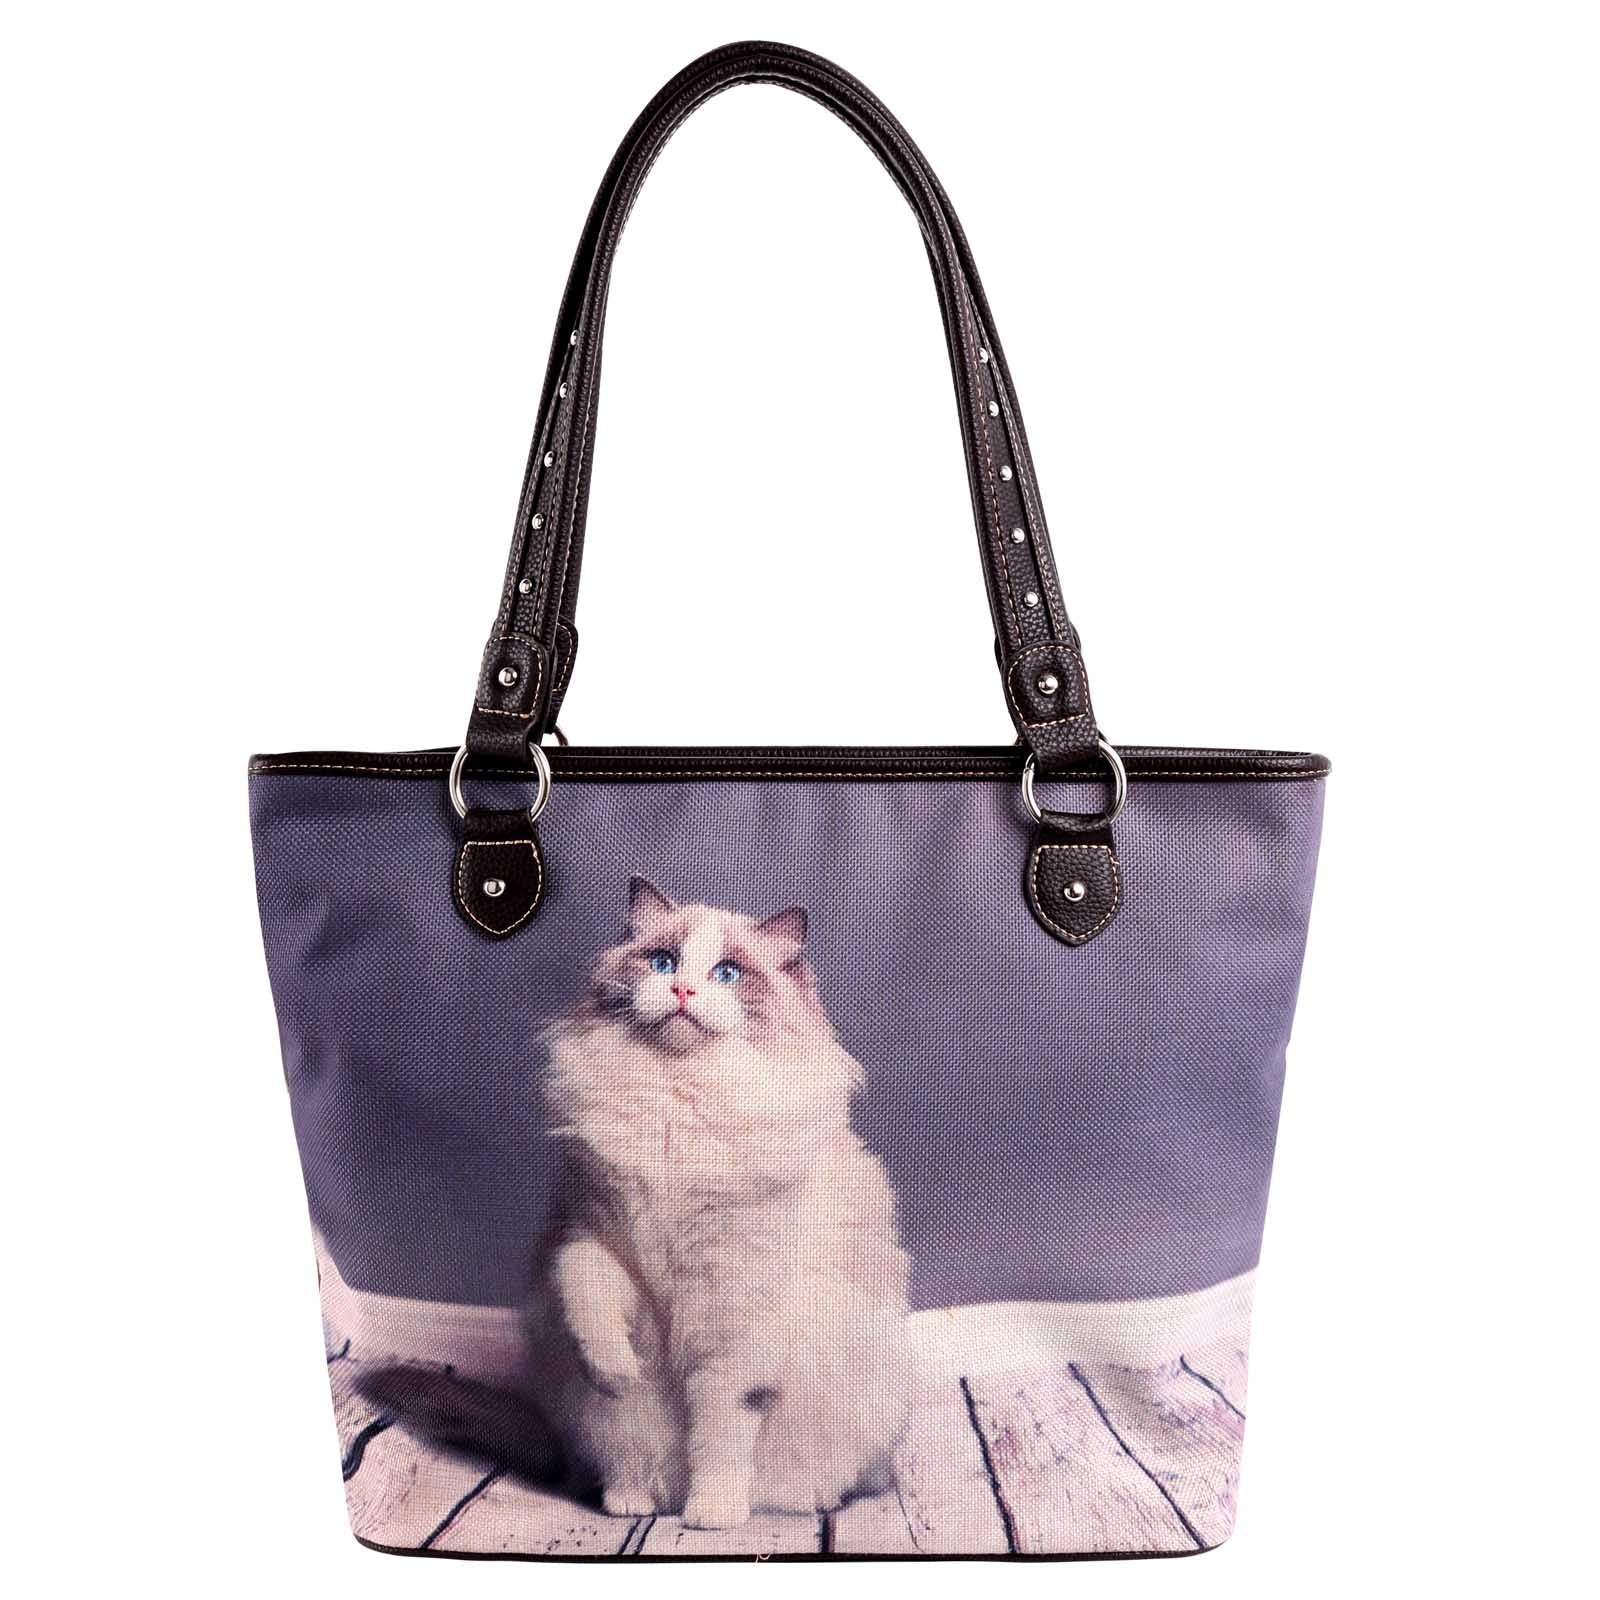 Cats C Canvas Tote Bag - Cowgirl Wear